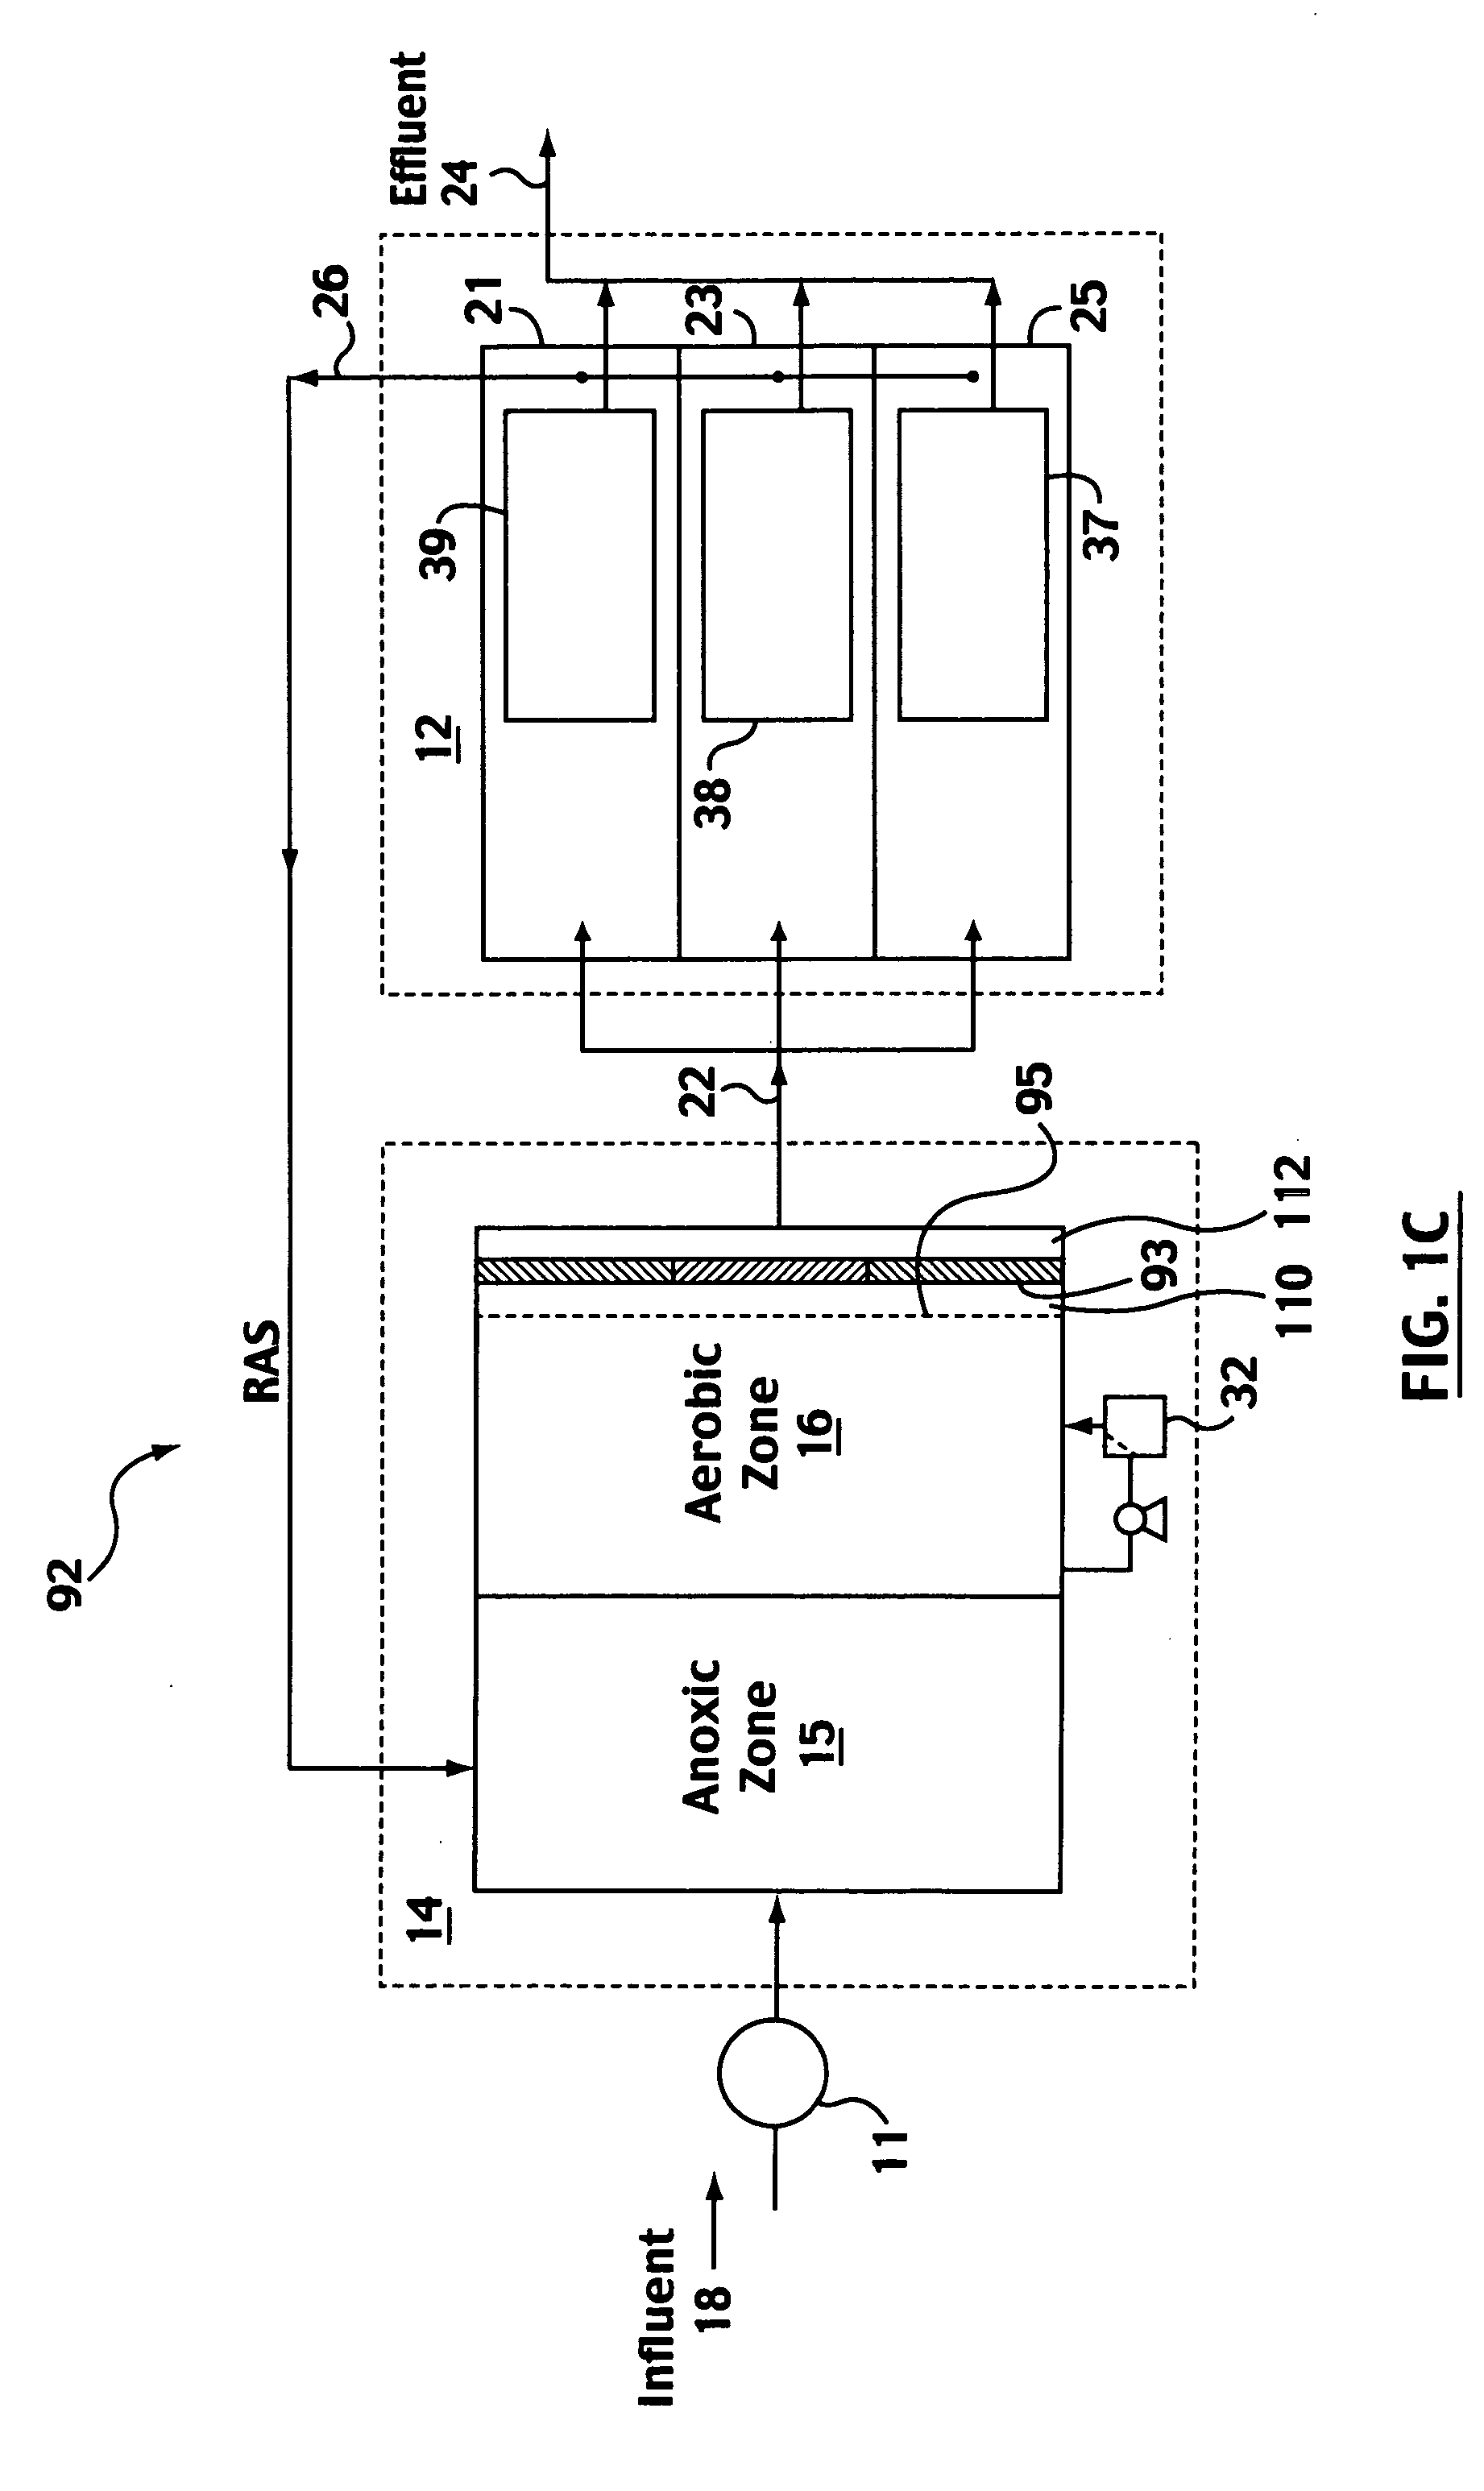 Screening apparatus for water treatment with membranes